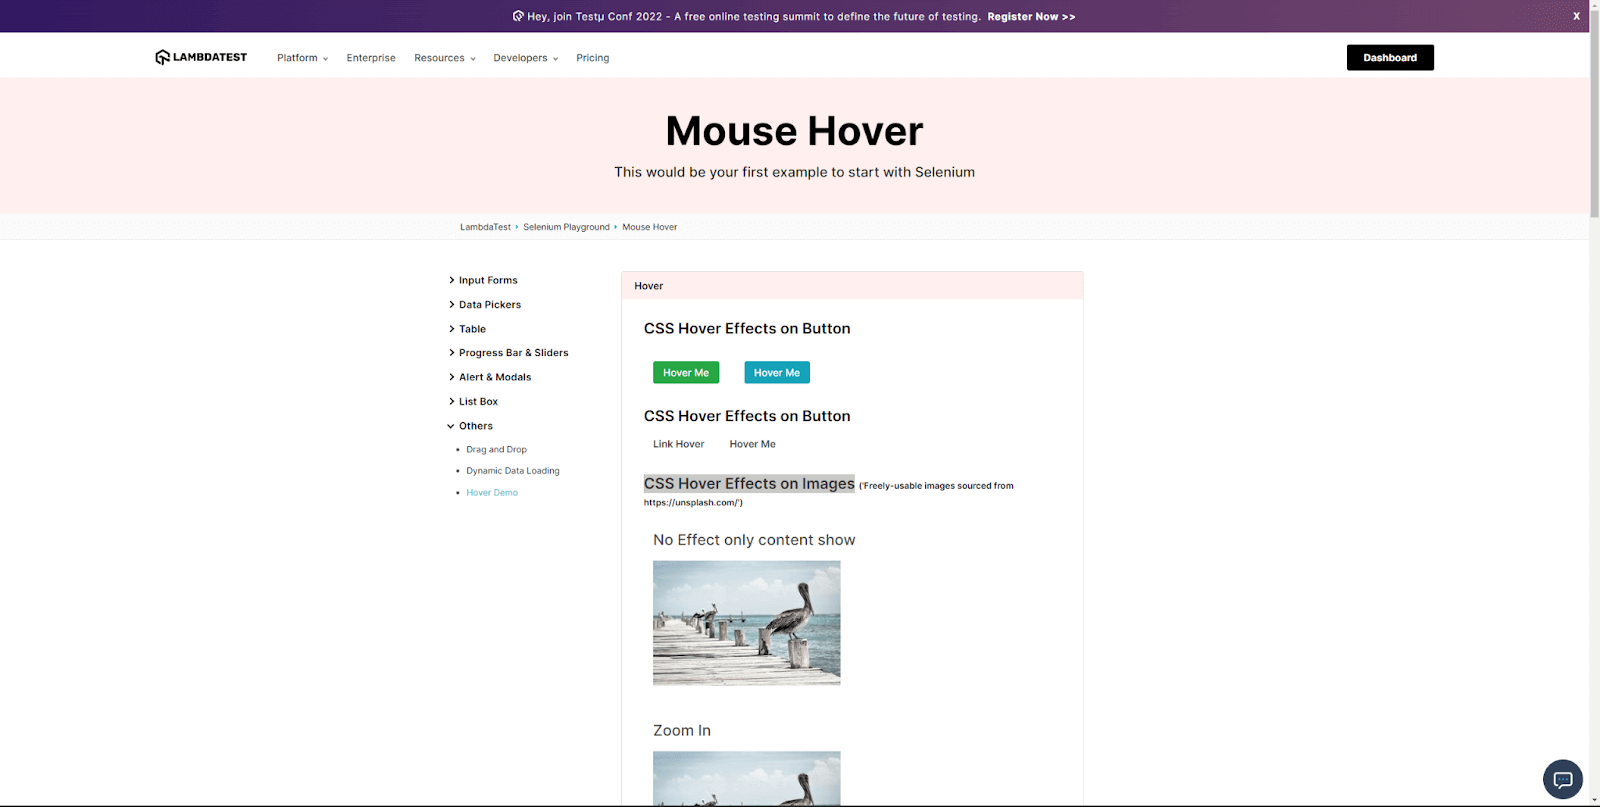 Mouse Hover